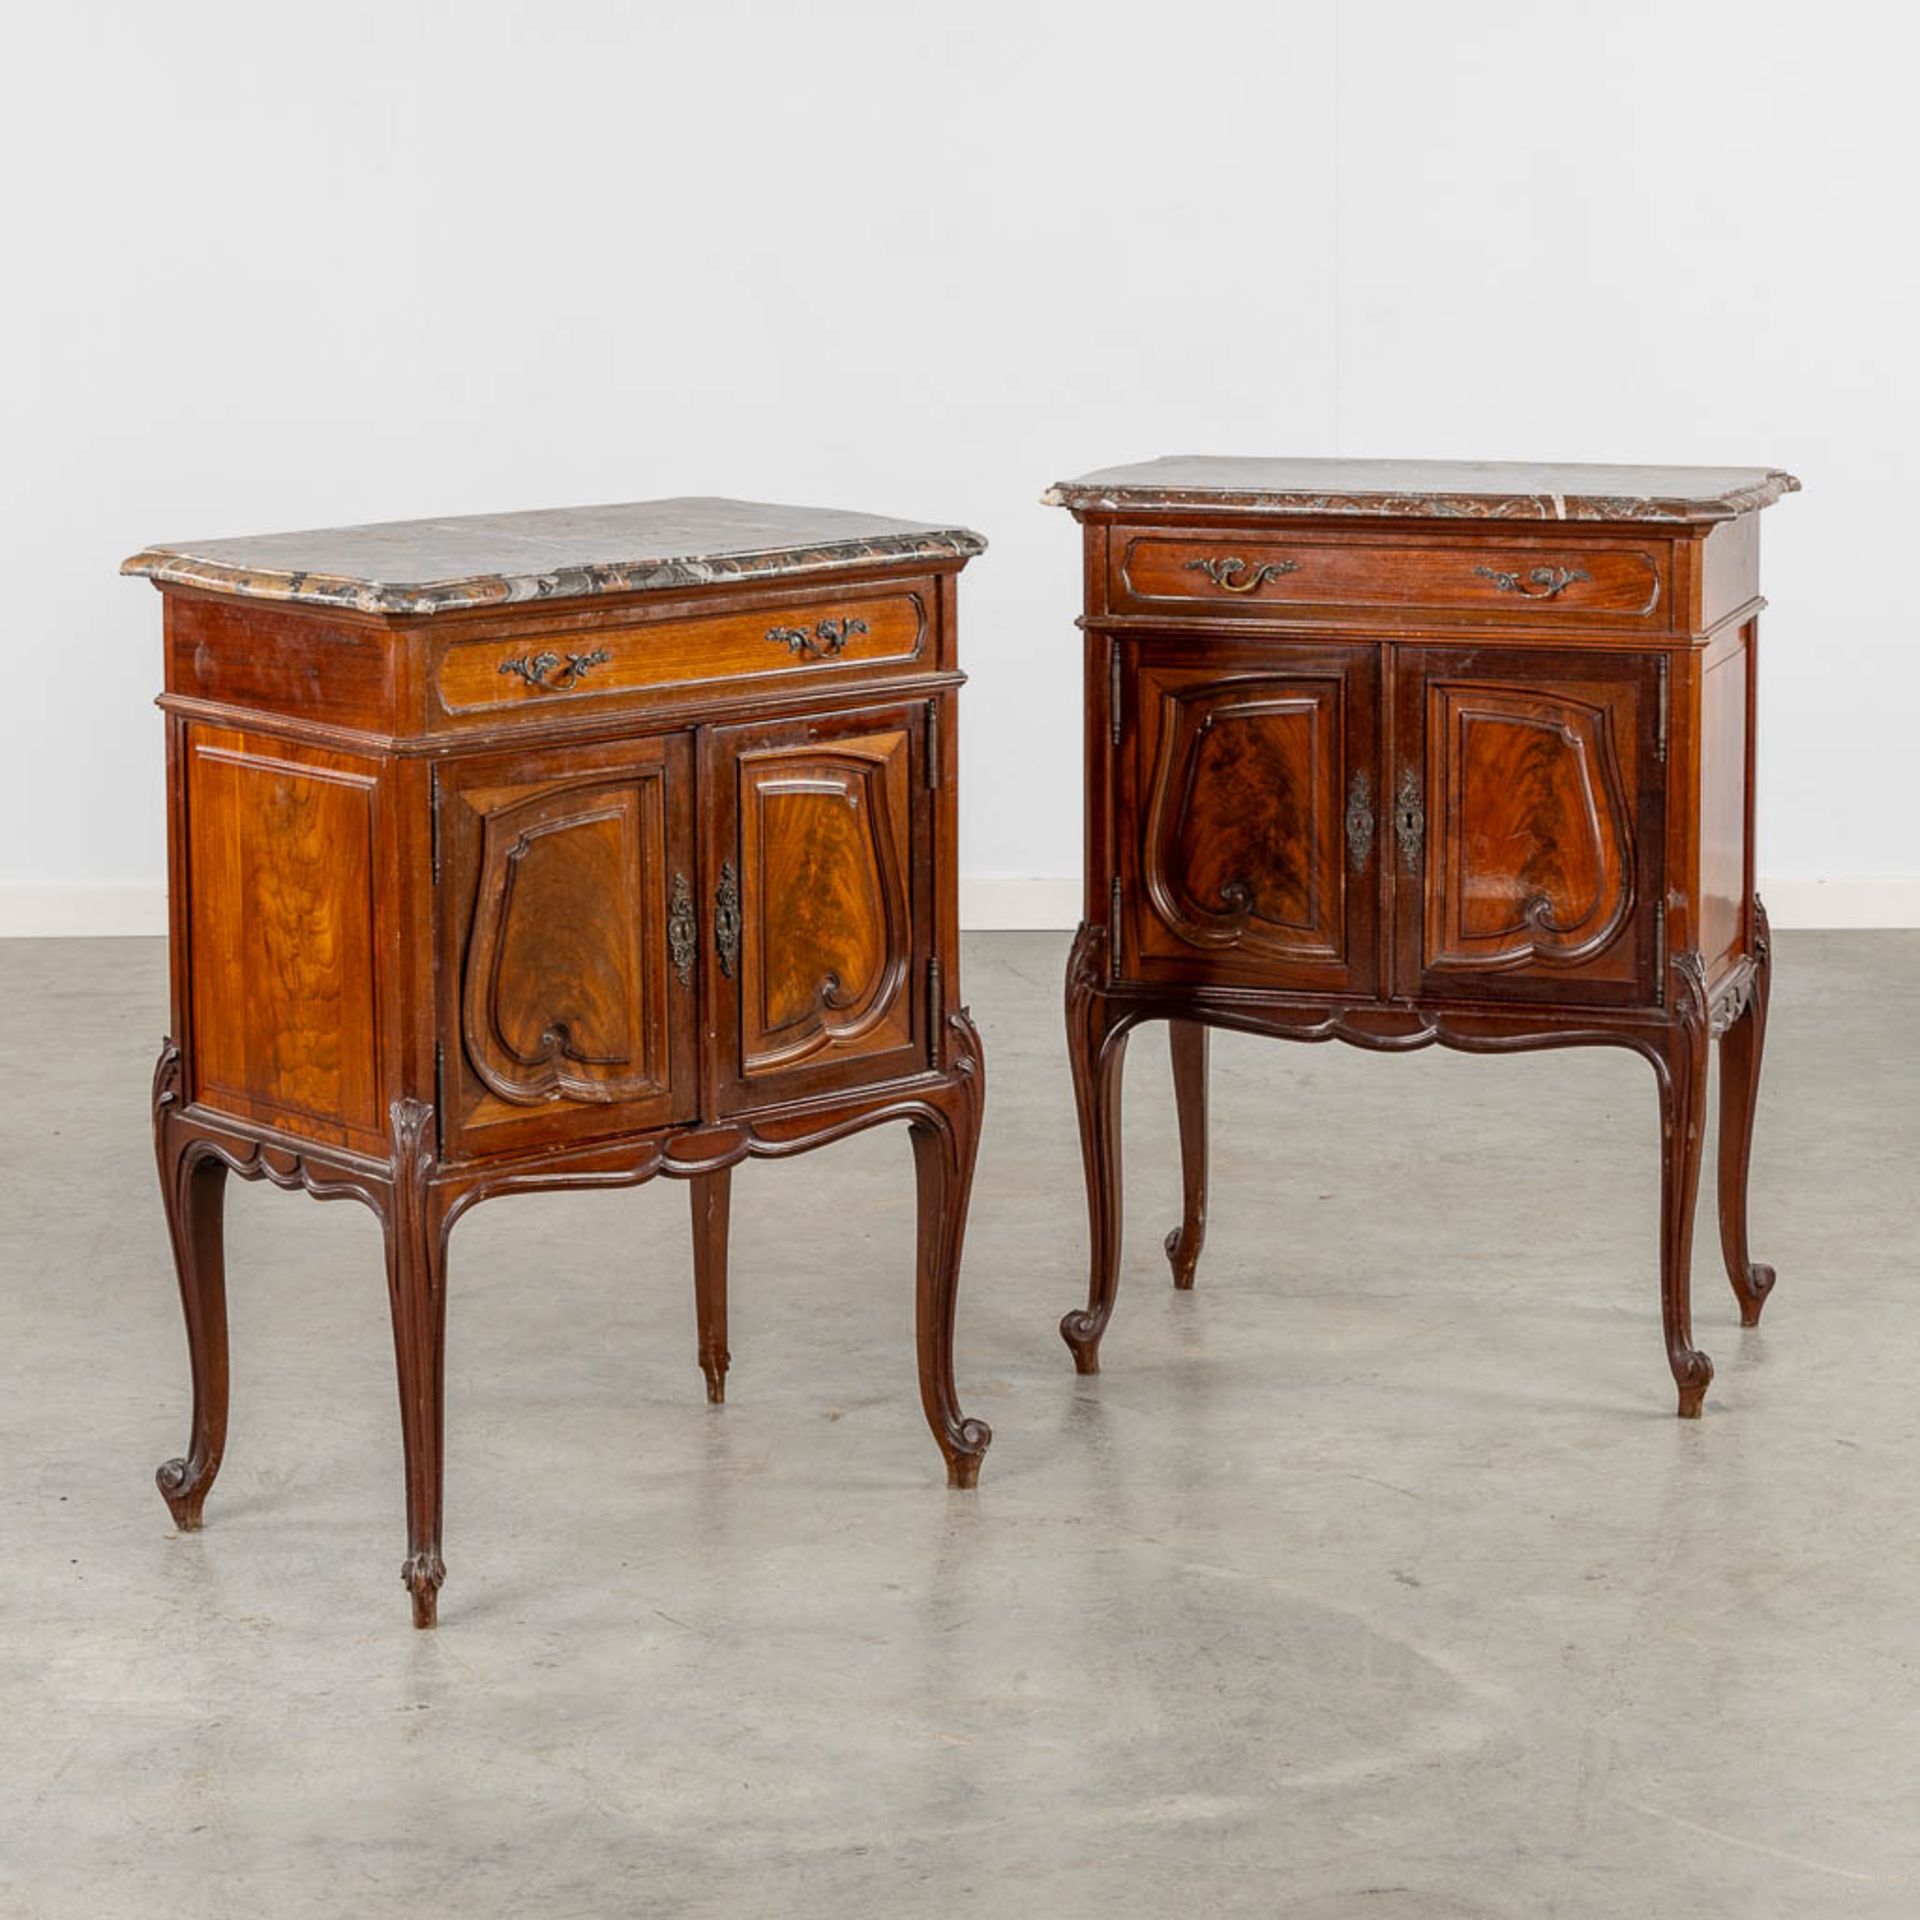 A pair of sculptured mahogany cabinets with a marble top, Louis XV style. (L:41 x W:63 x H:80 cm)